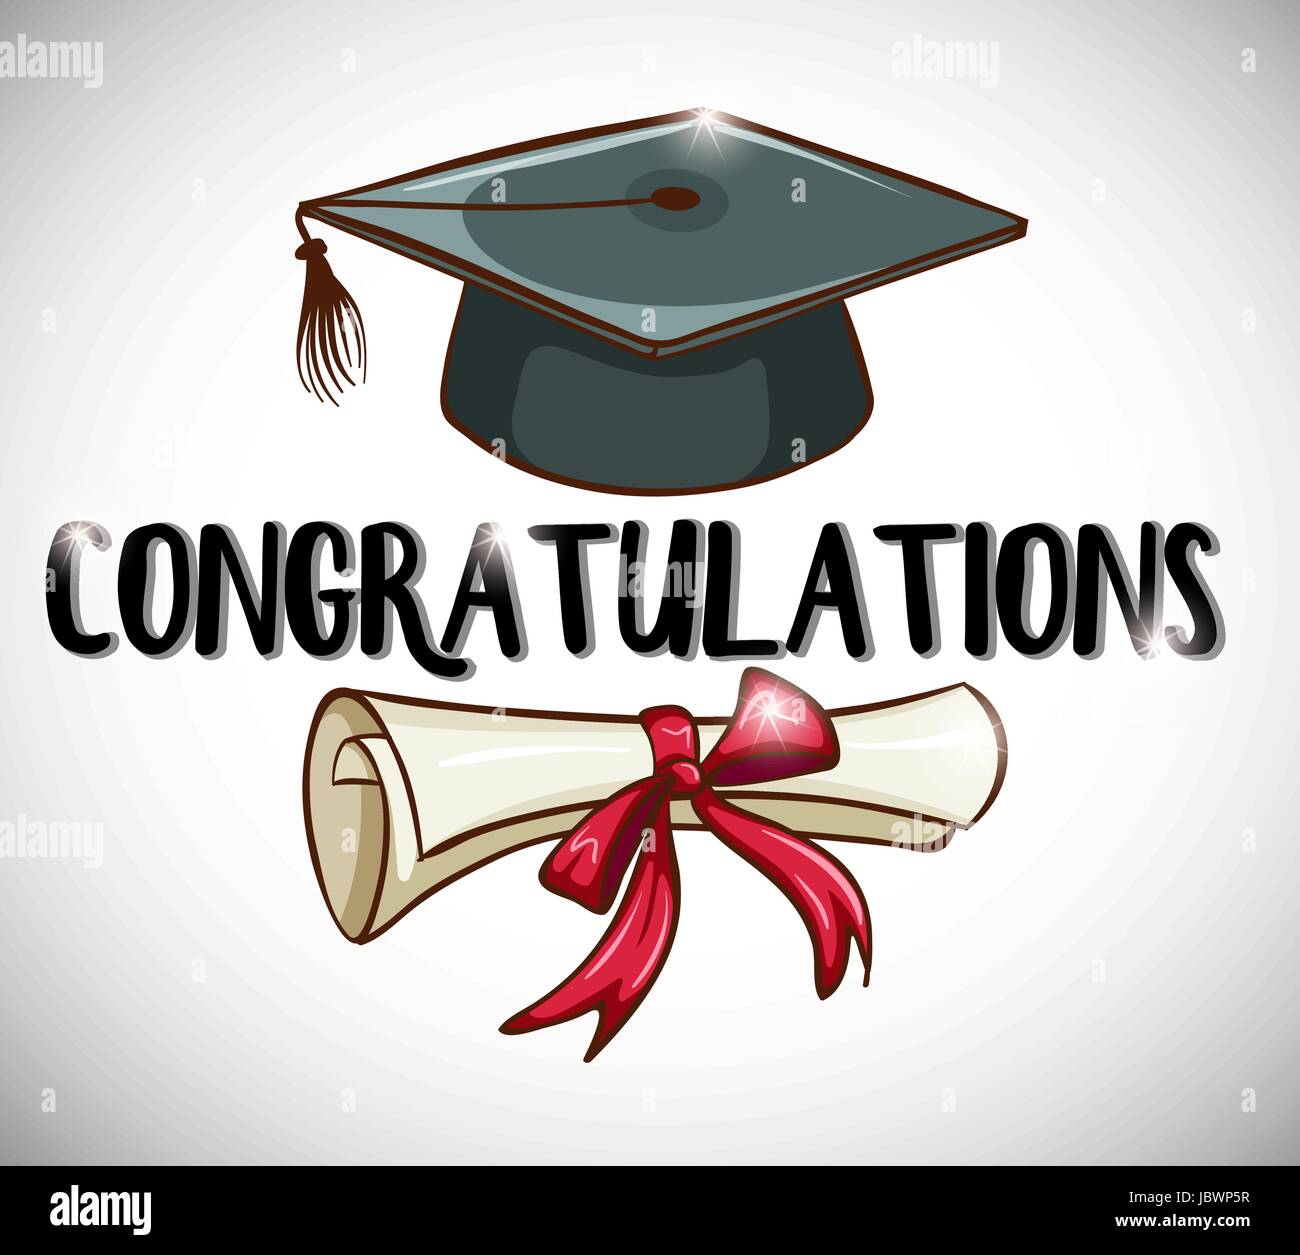 Congratulations card template with cap and degree illustration Stock ...